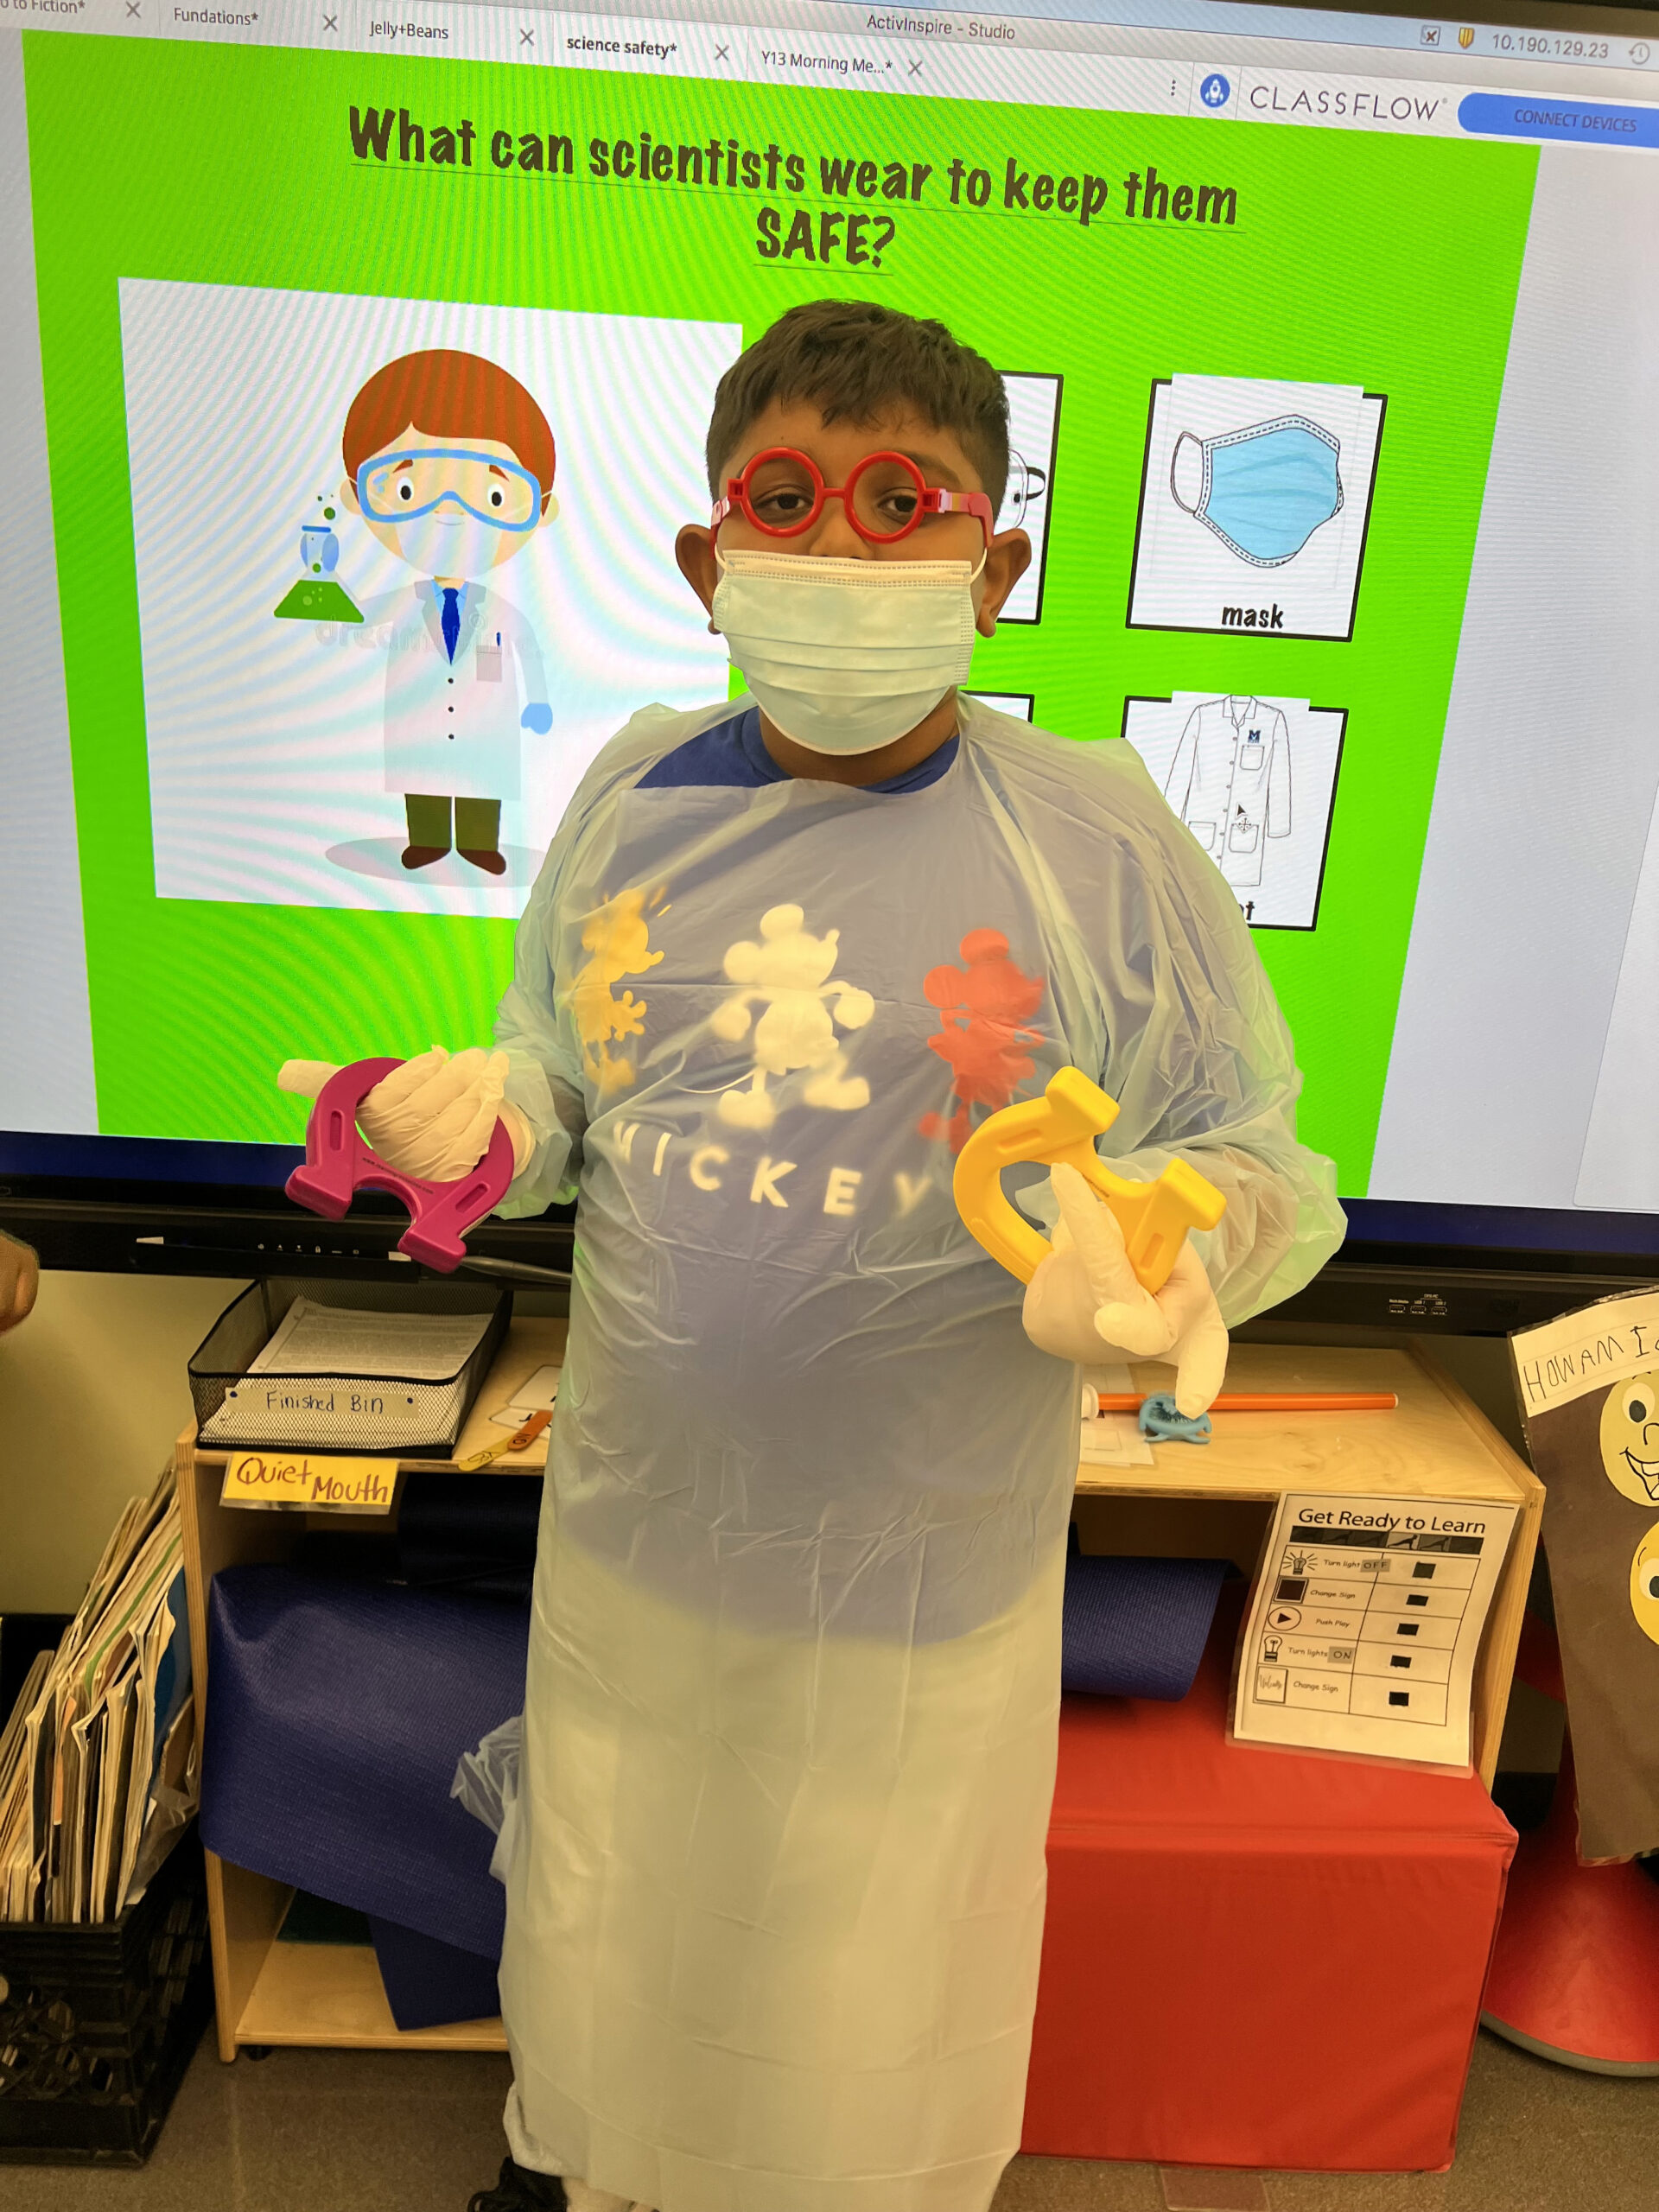 boy wearing lab safety equipment in front o a classroom whiteboard displaying science safety tools goggles, lab coat and gloves